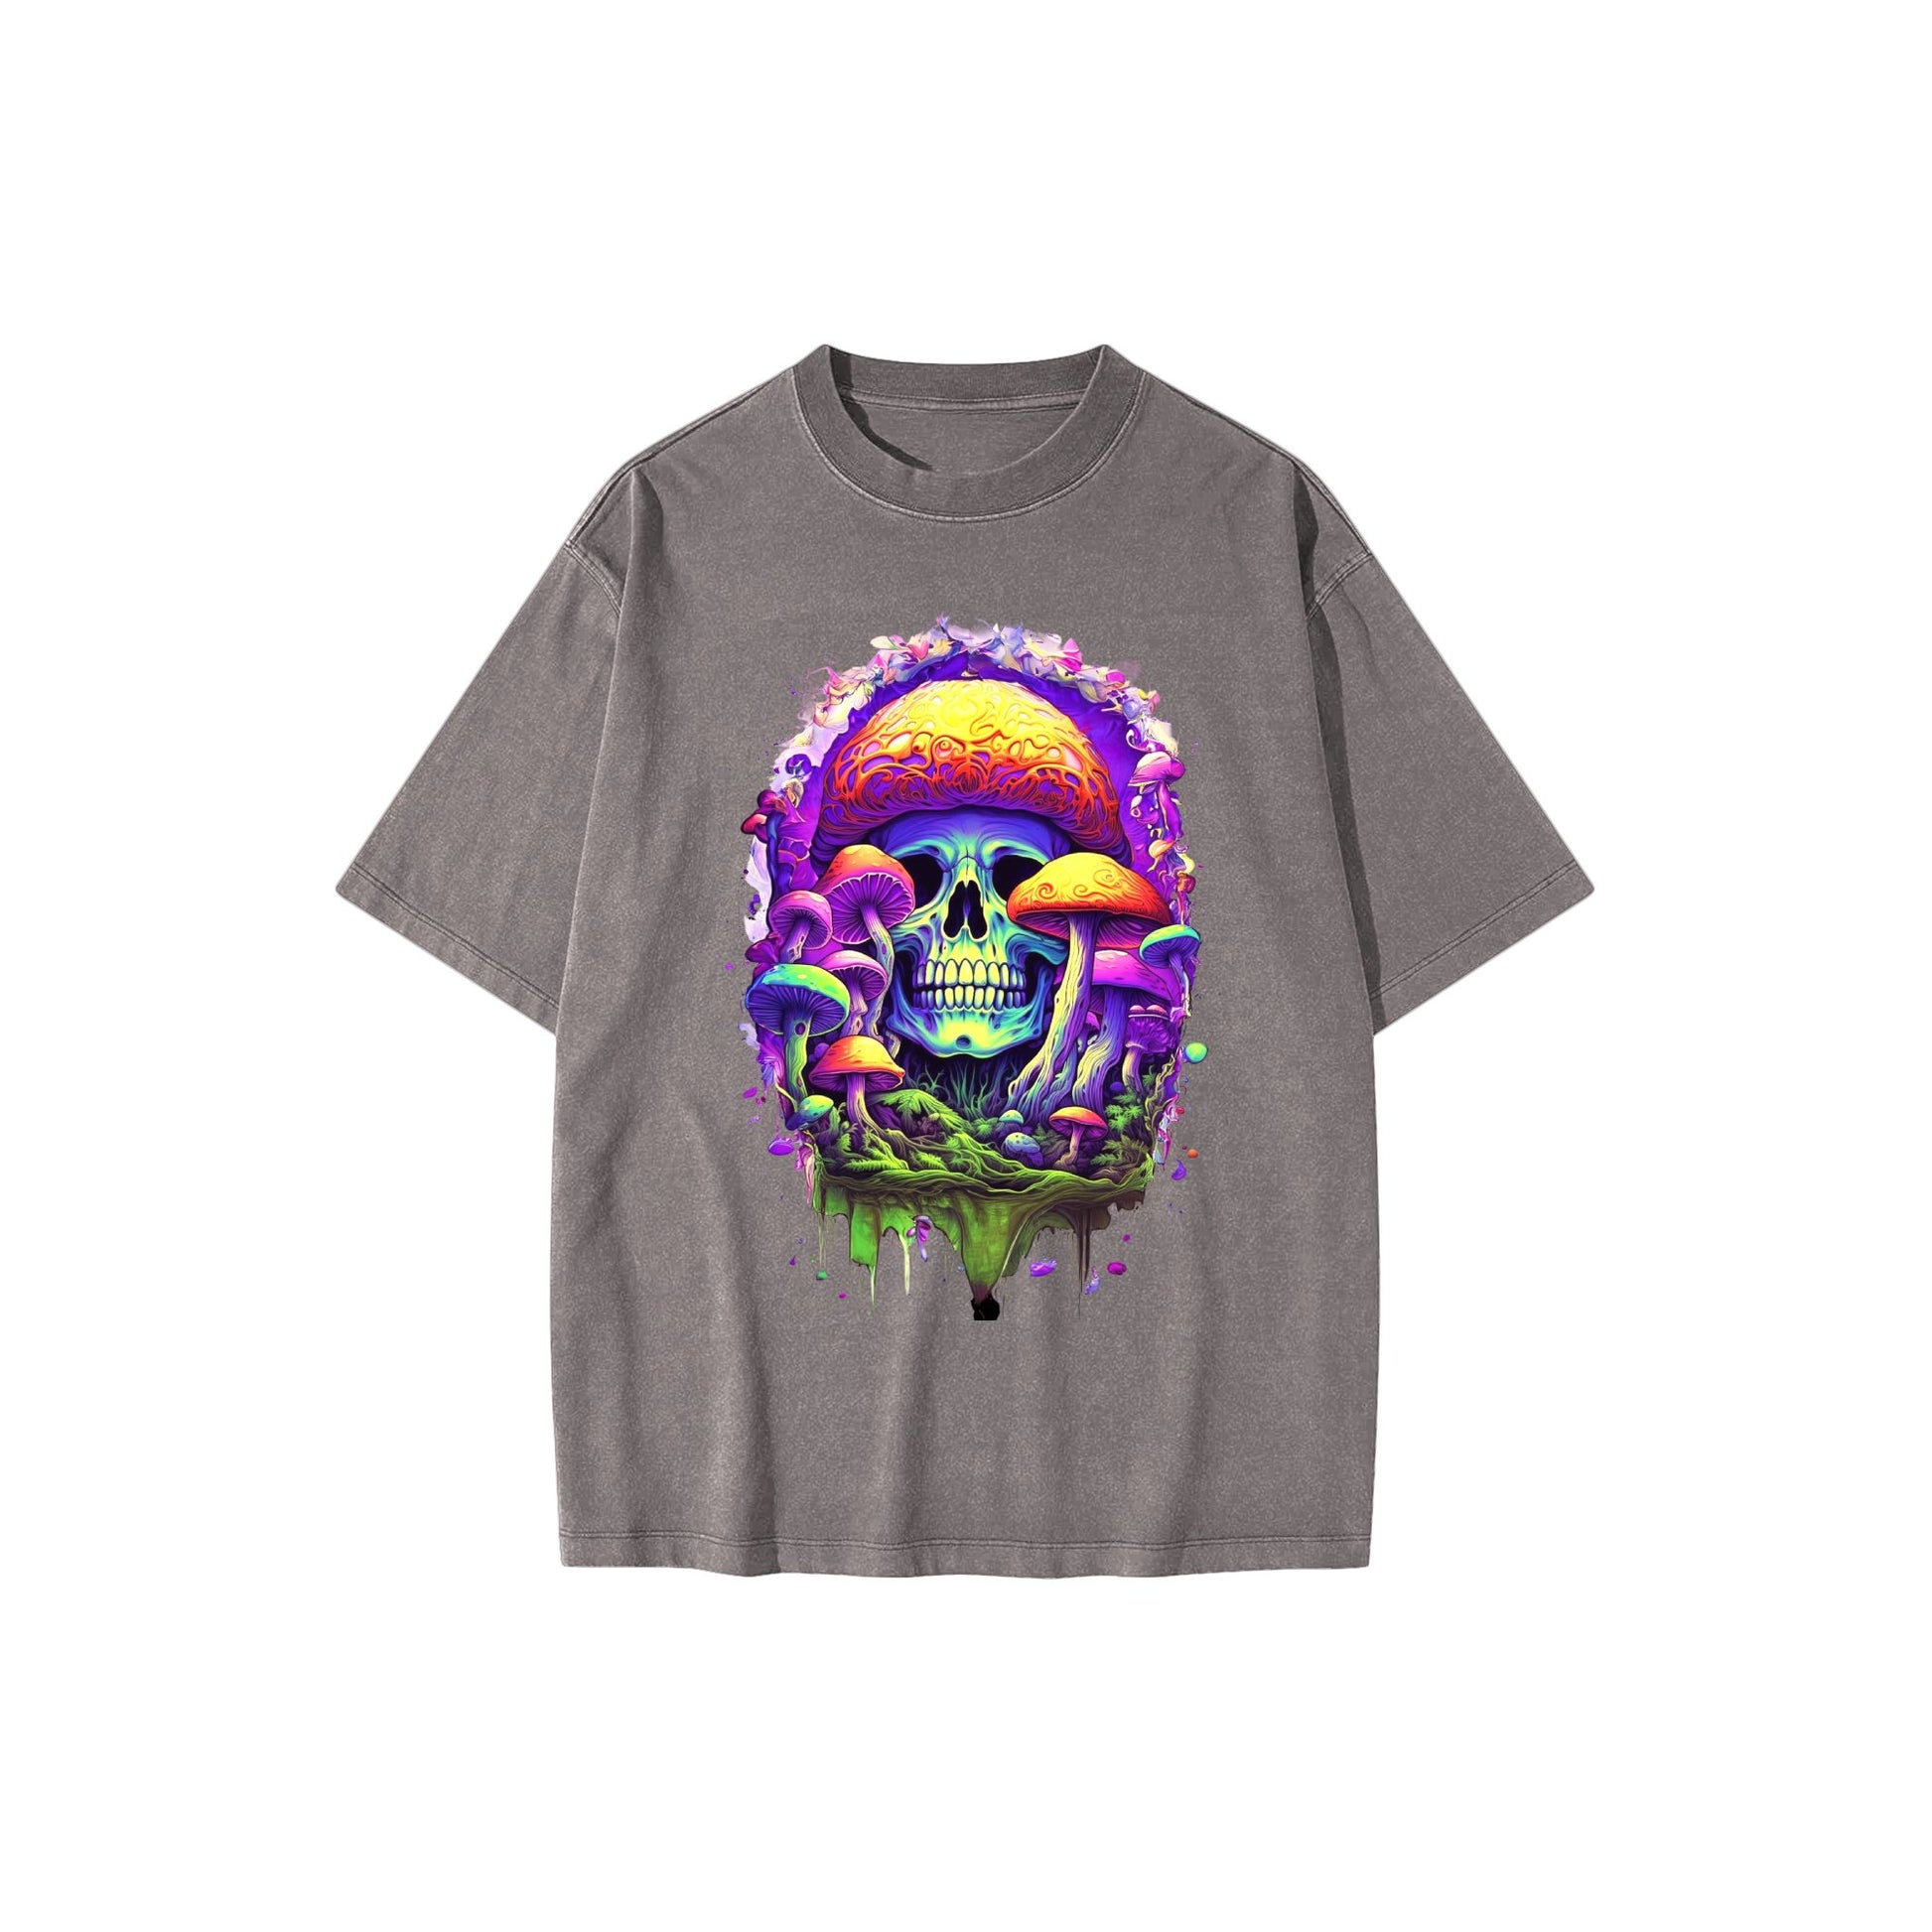 the_skull_and_mushroom_design_with_a_girl_wearing_a__b2ed024f-f315-40ee-bc4d-2e6b6bde2348 - Front